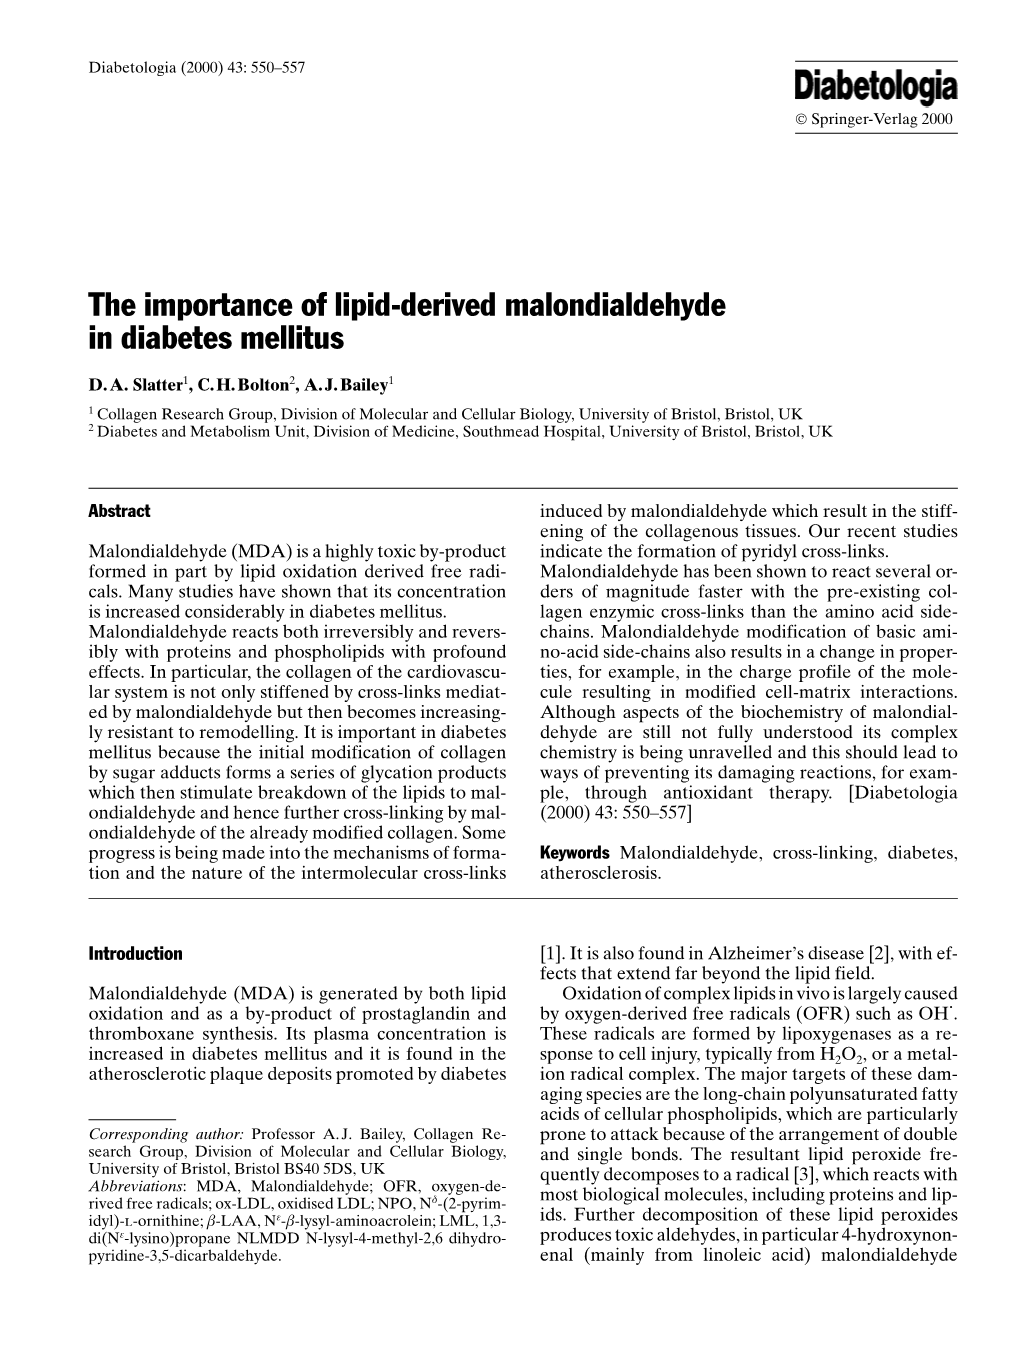 The Importance of Lipid-Derived Malondialdehyde in Diabetes Mellitus